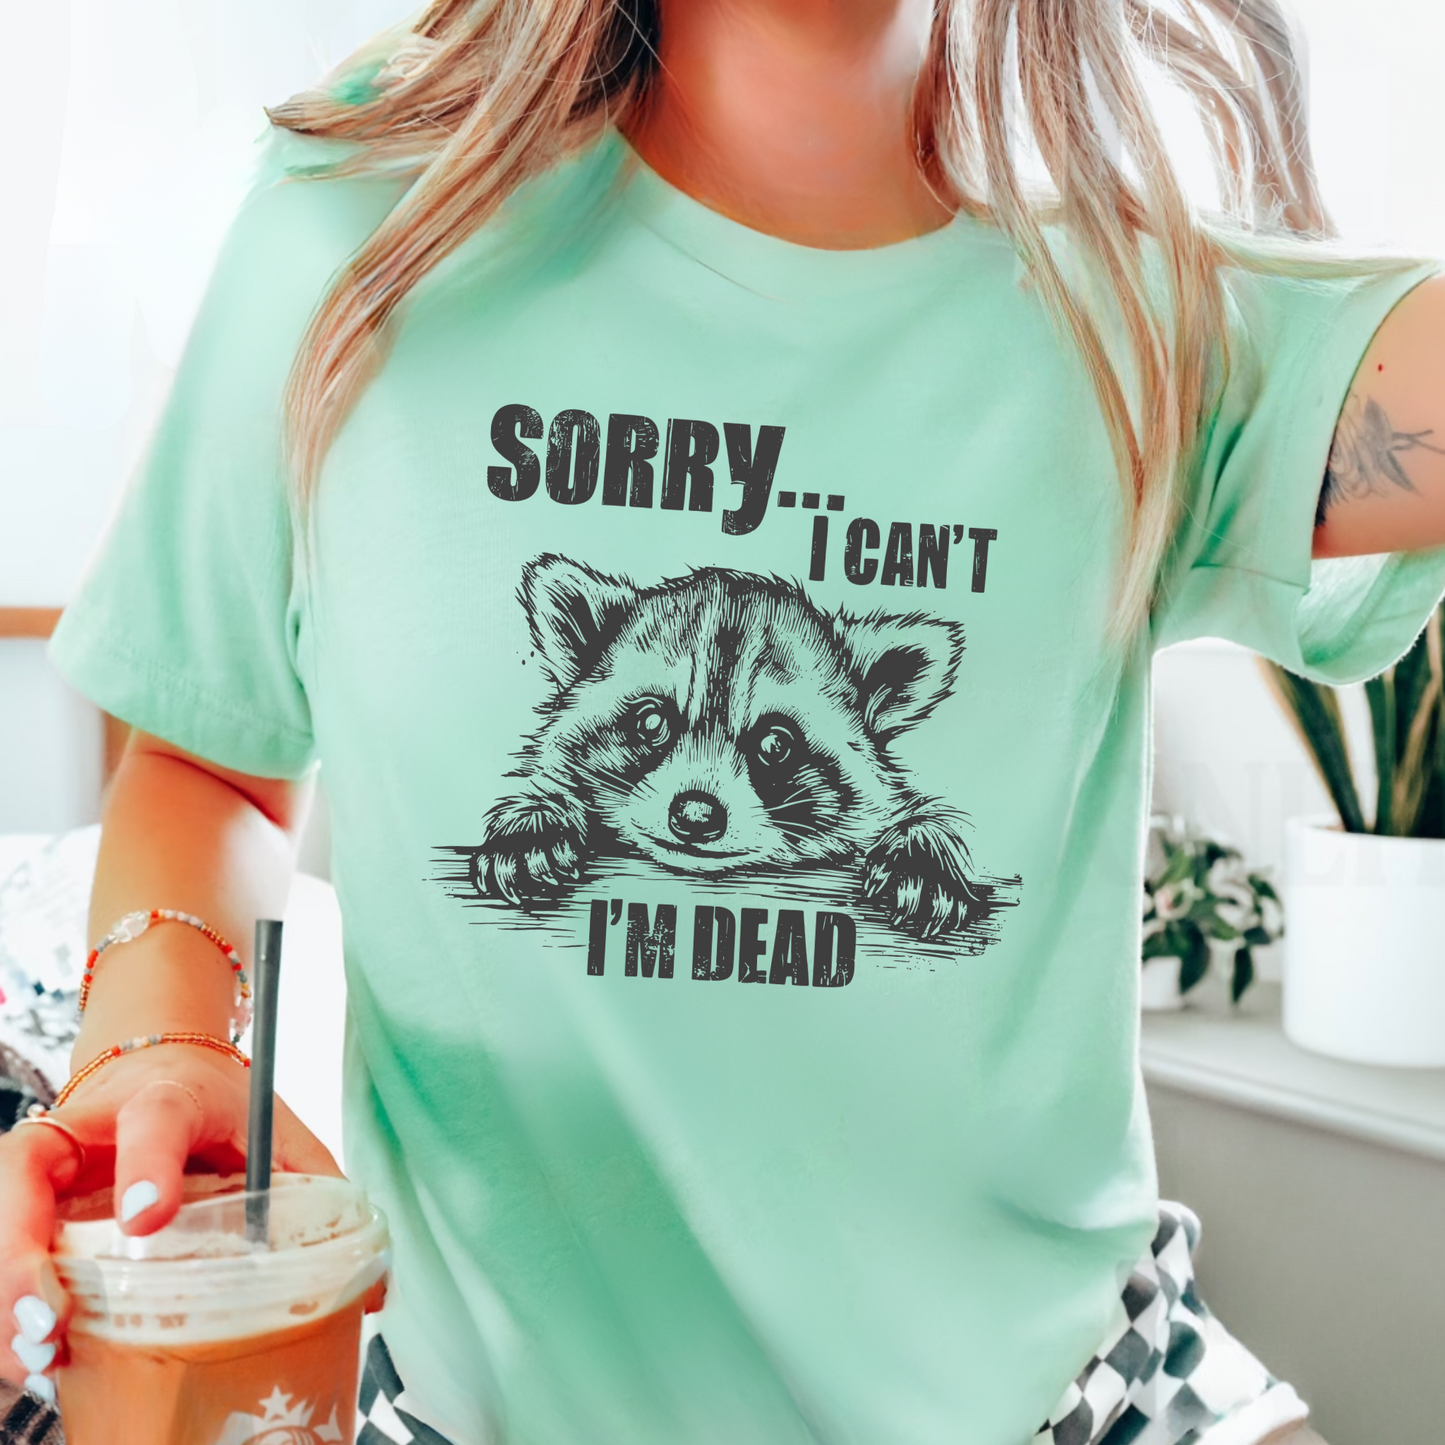 Sorry, I Can't, I'm Dead T-Shirt